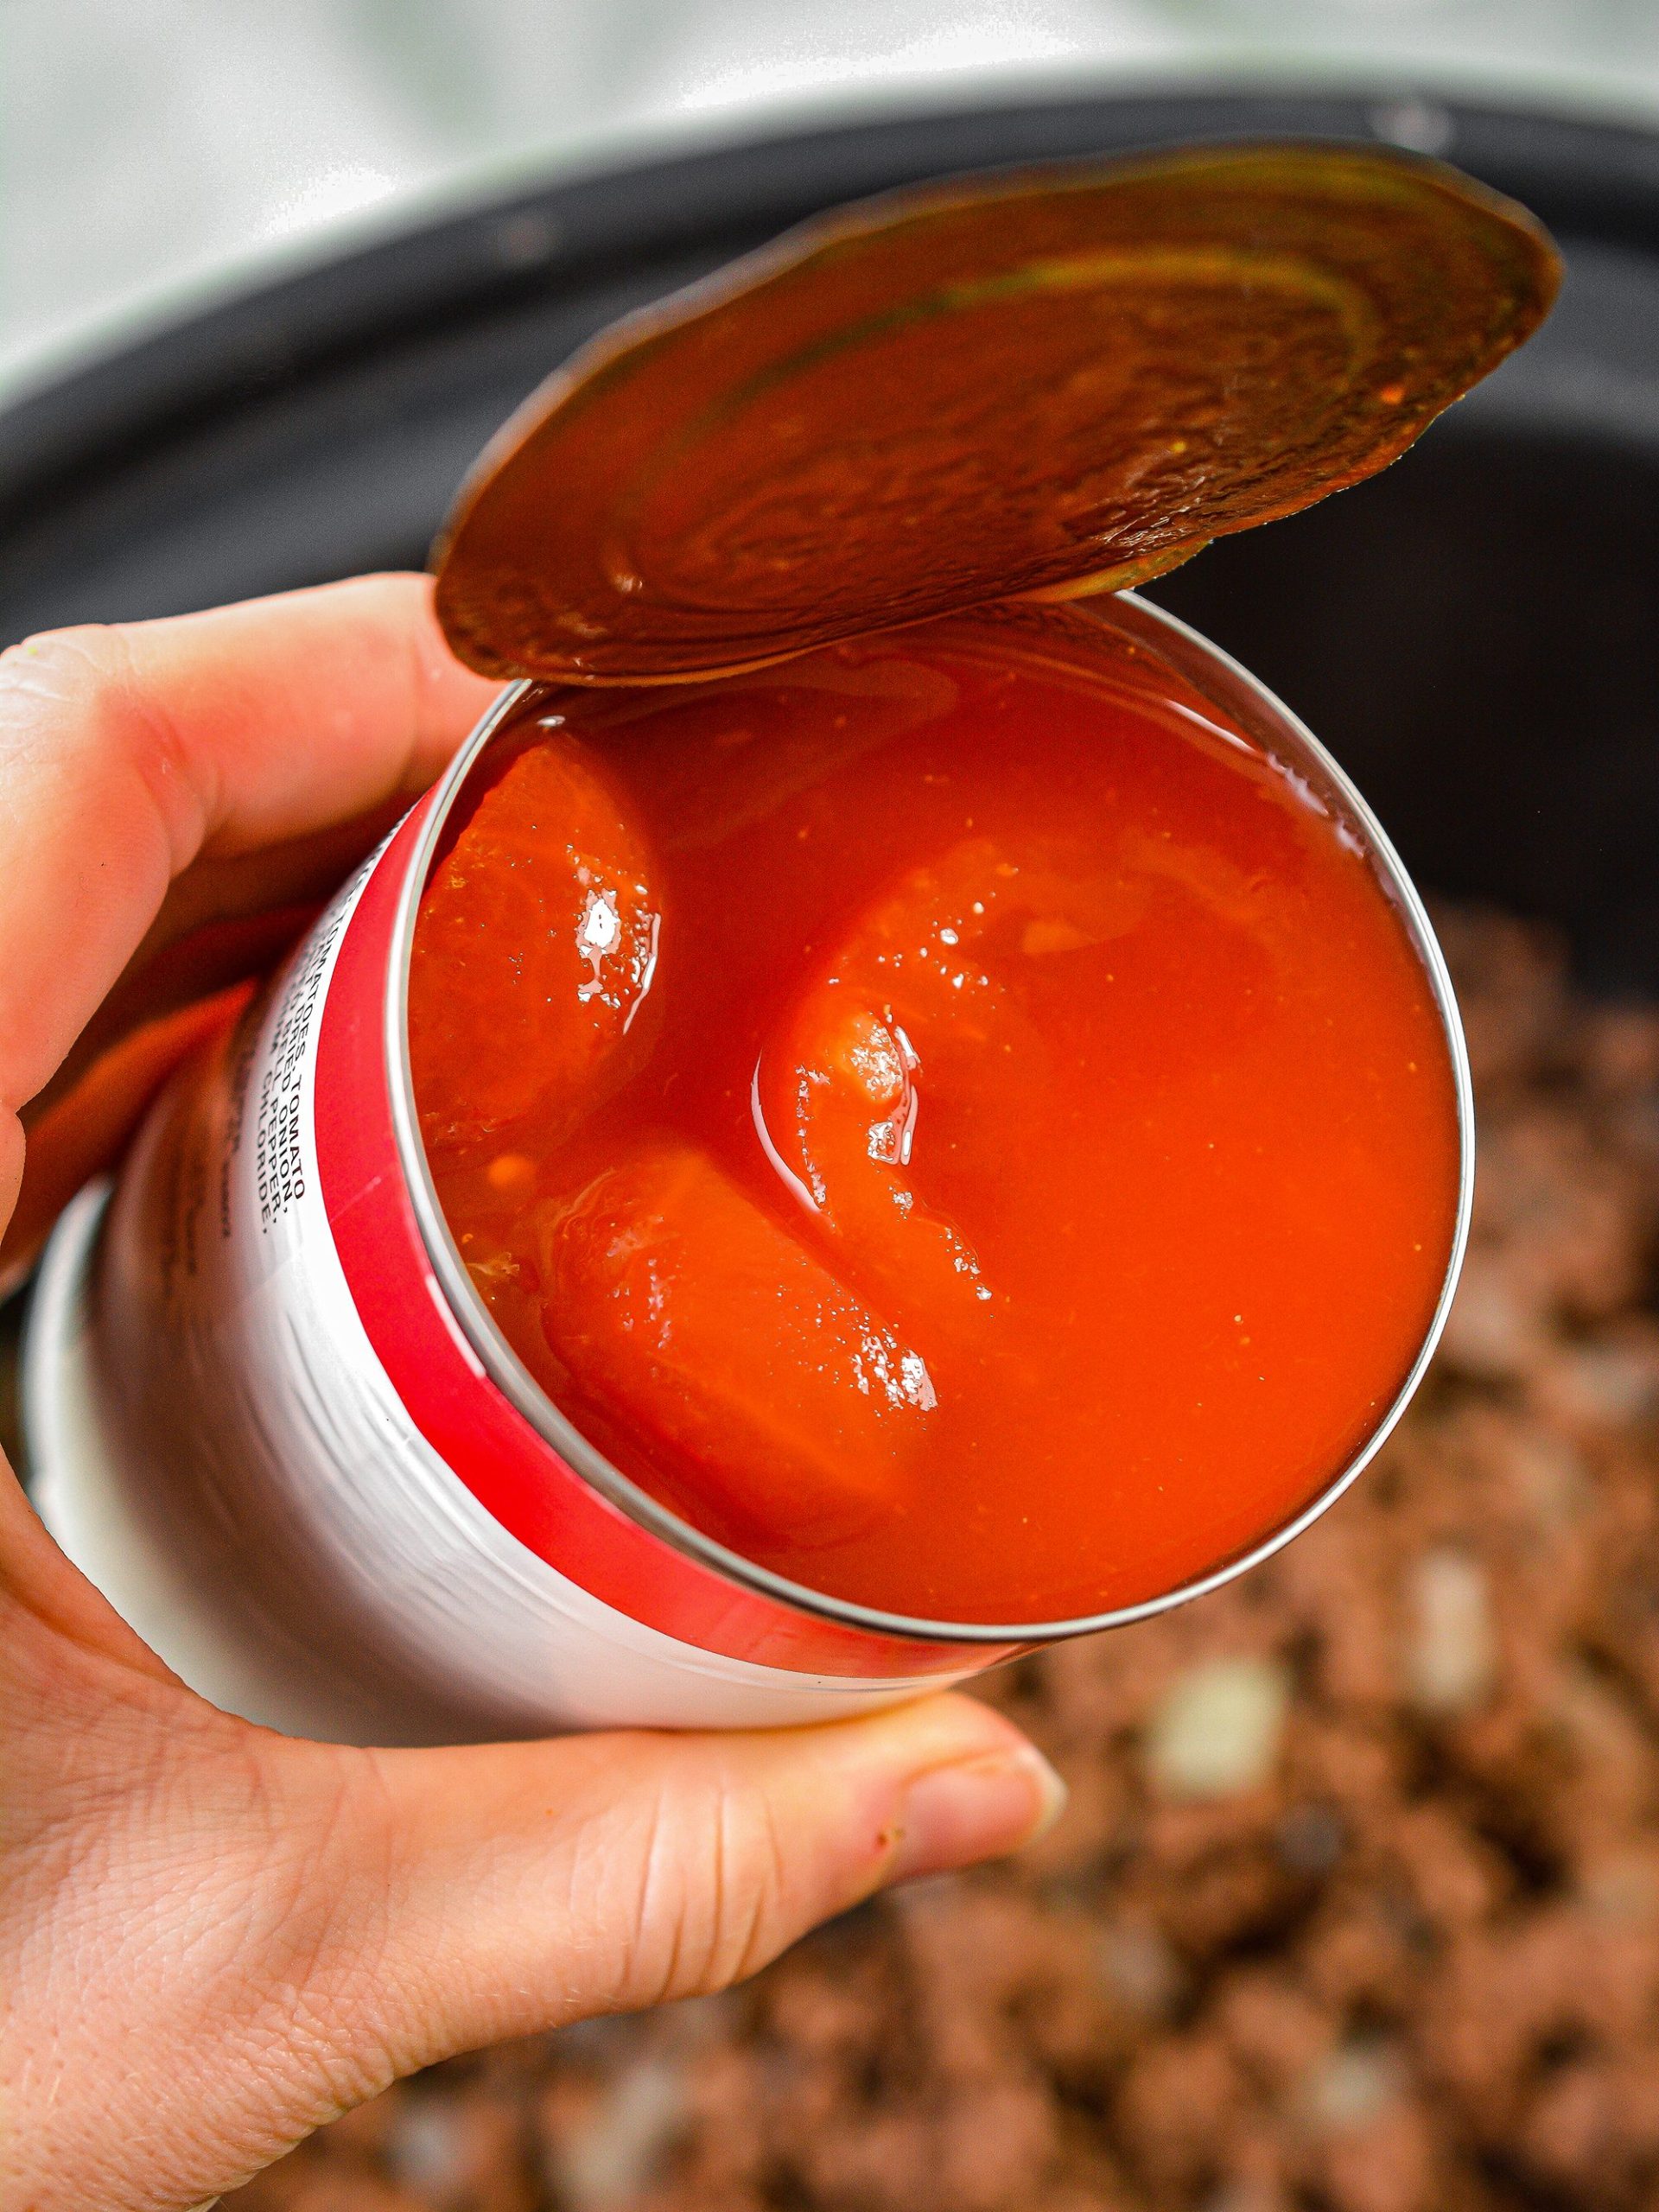 Cover the meat mixture with a 15 oz can of stewed tomatoes.